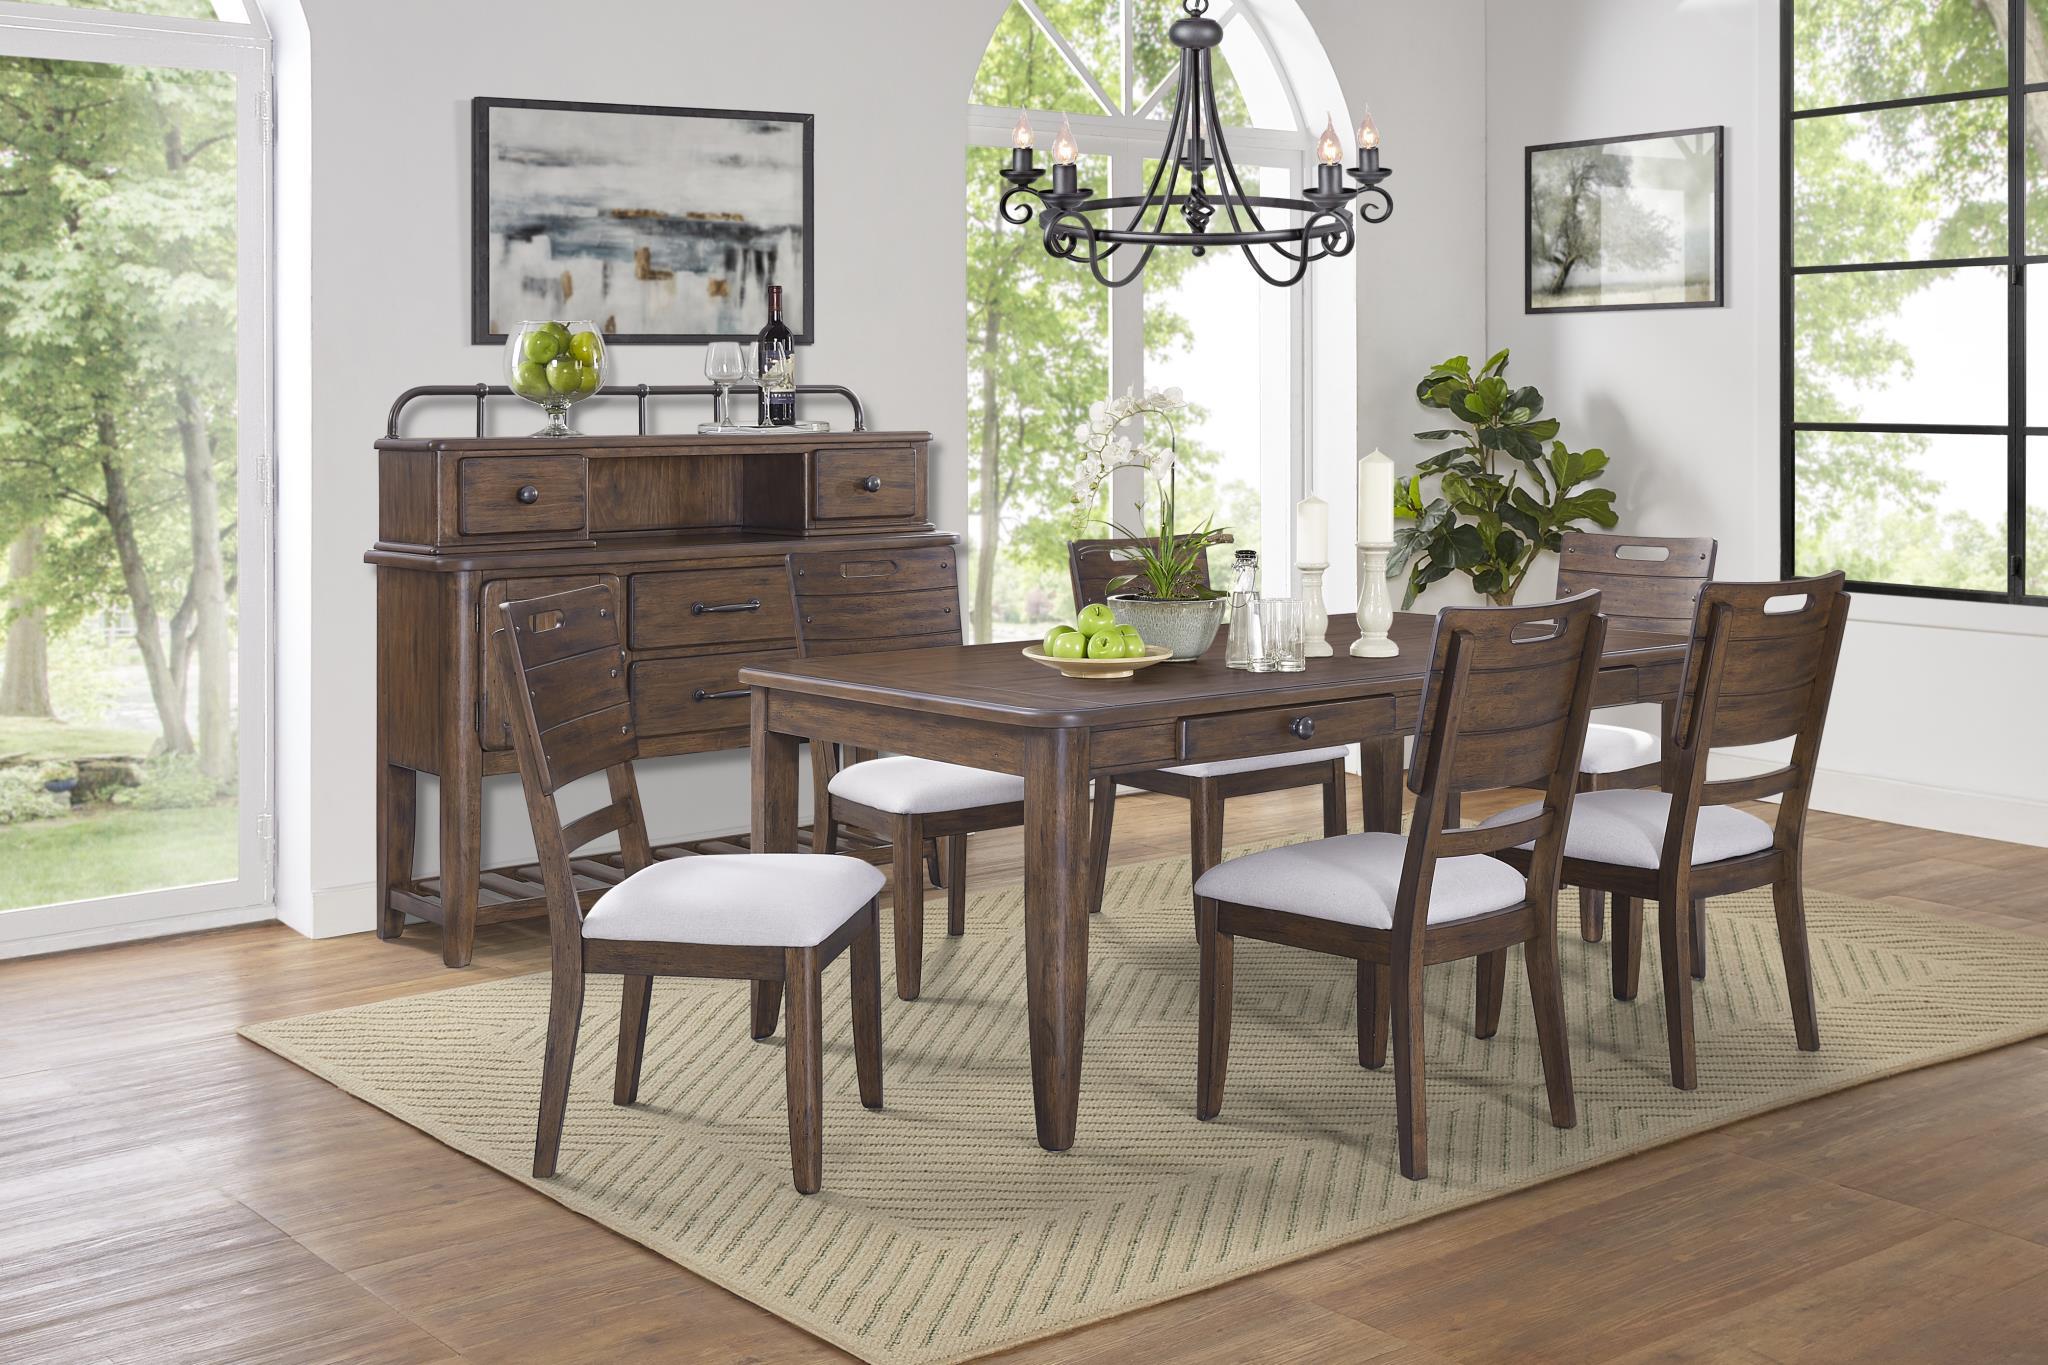 Rustic, Cottage, Farmhouse Dining Table Set DANVILLE 315-501-Set-9 315-501-9pcs in Brown Fabric